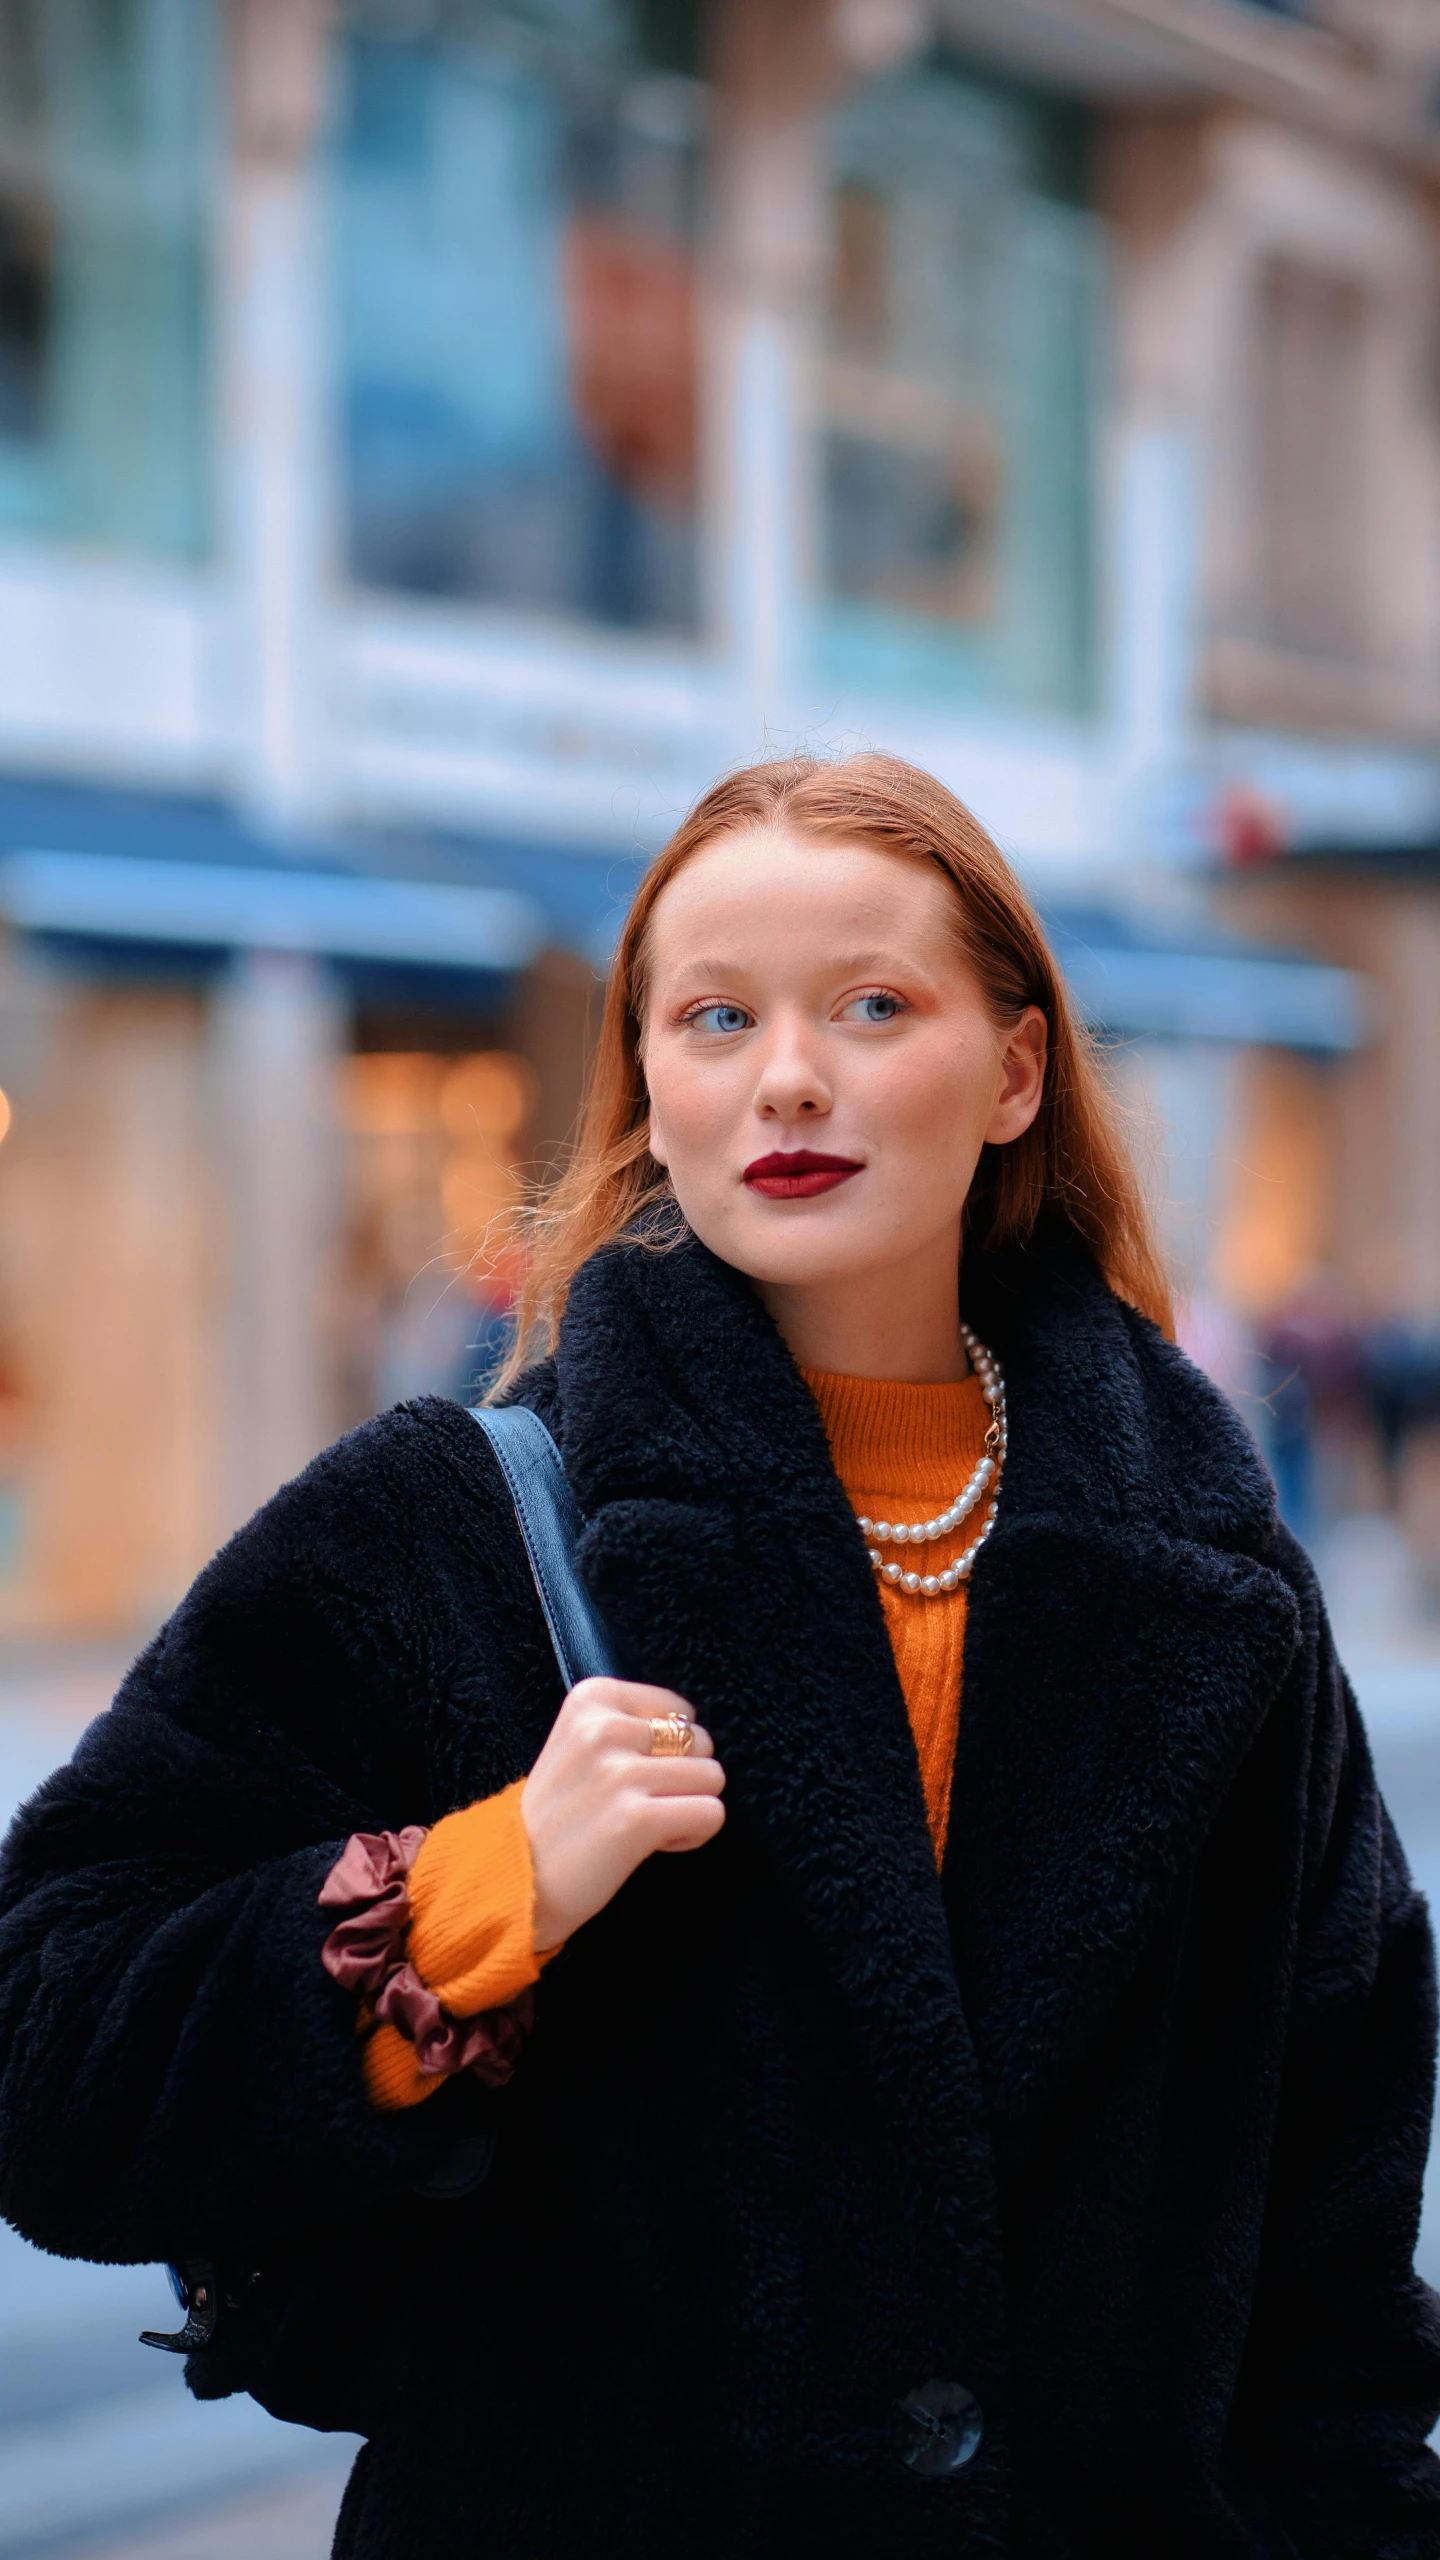 a red headed woman in an orange sweater, black coat and a pearl necklace, on a city street